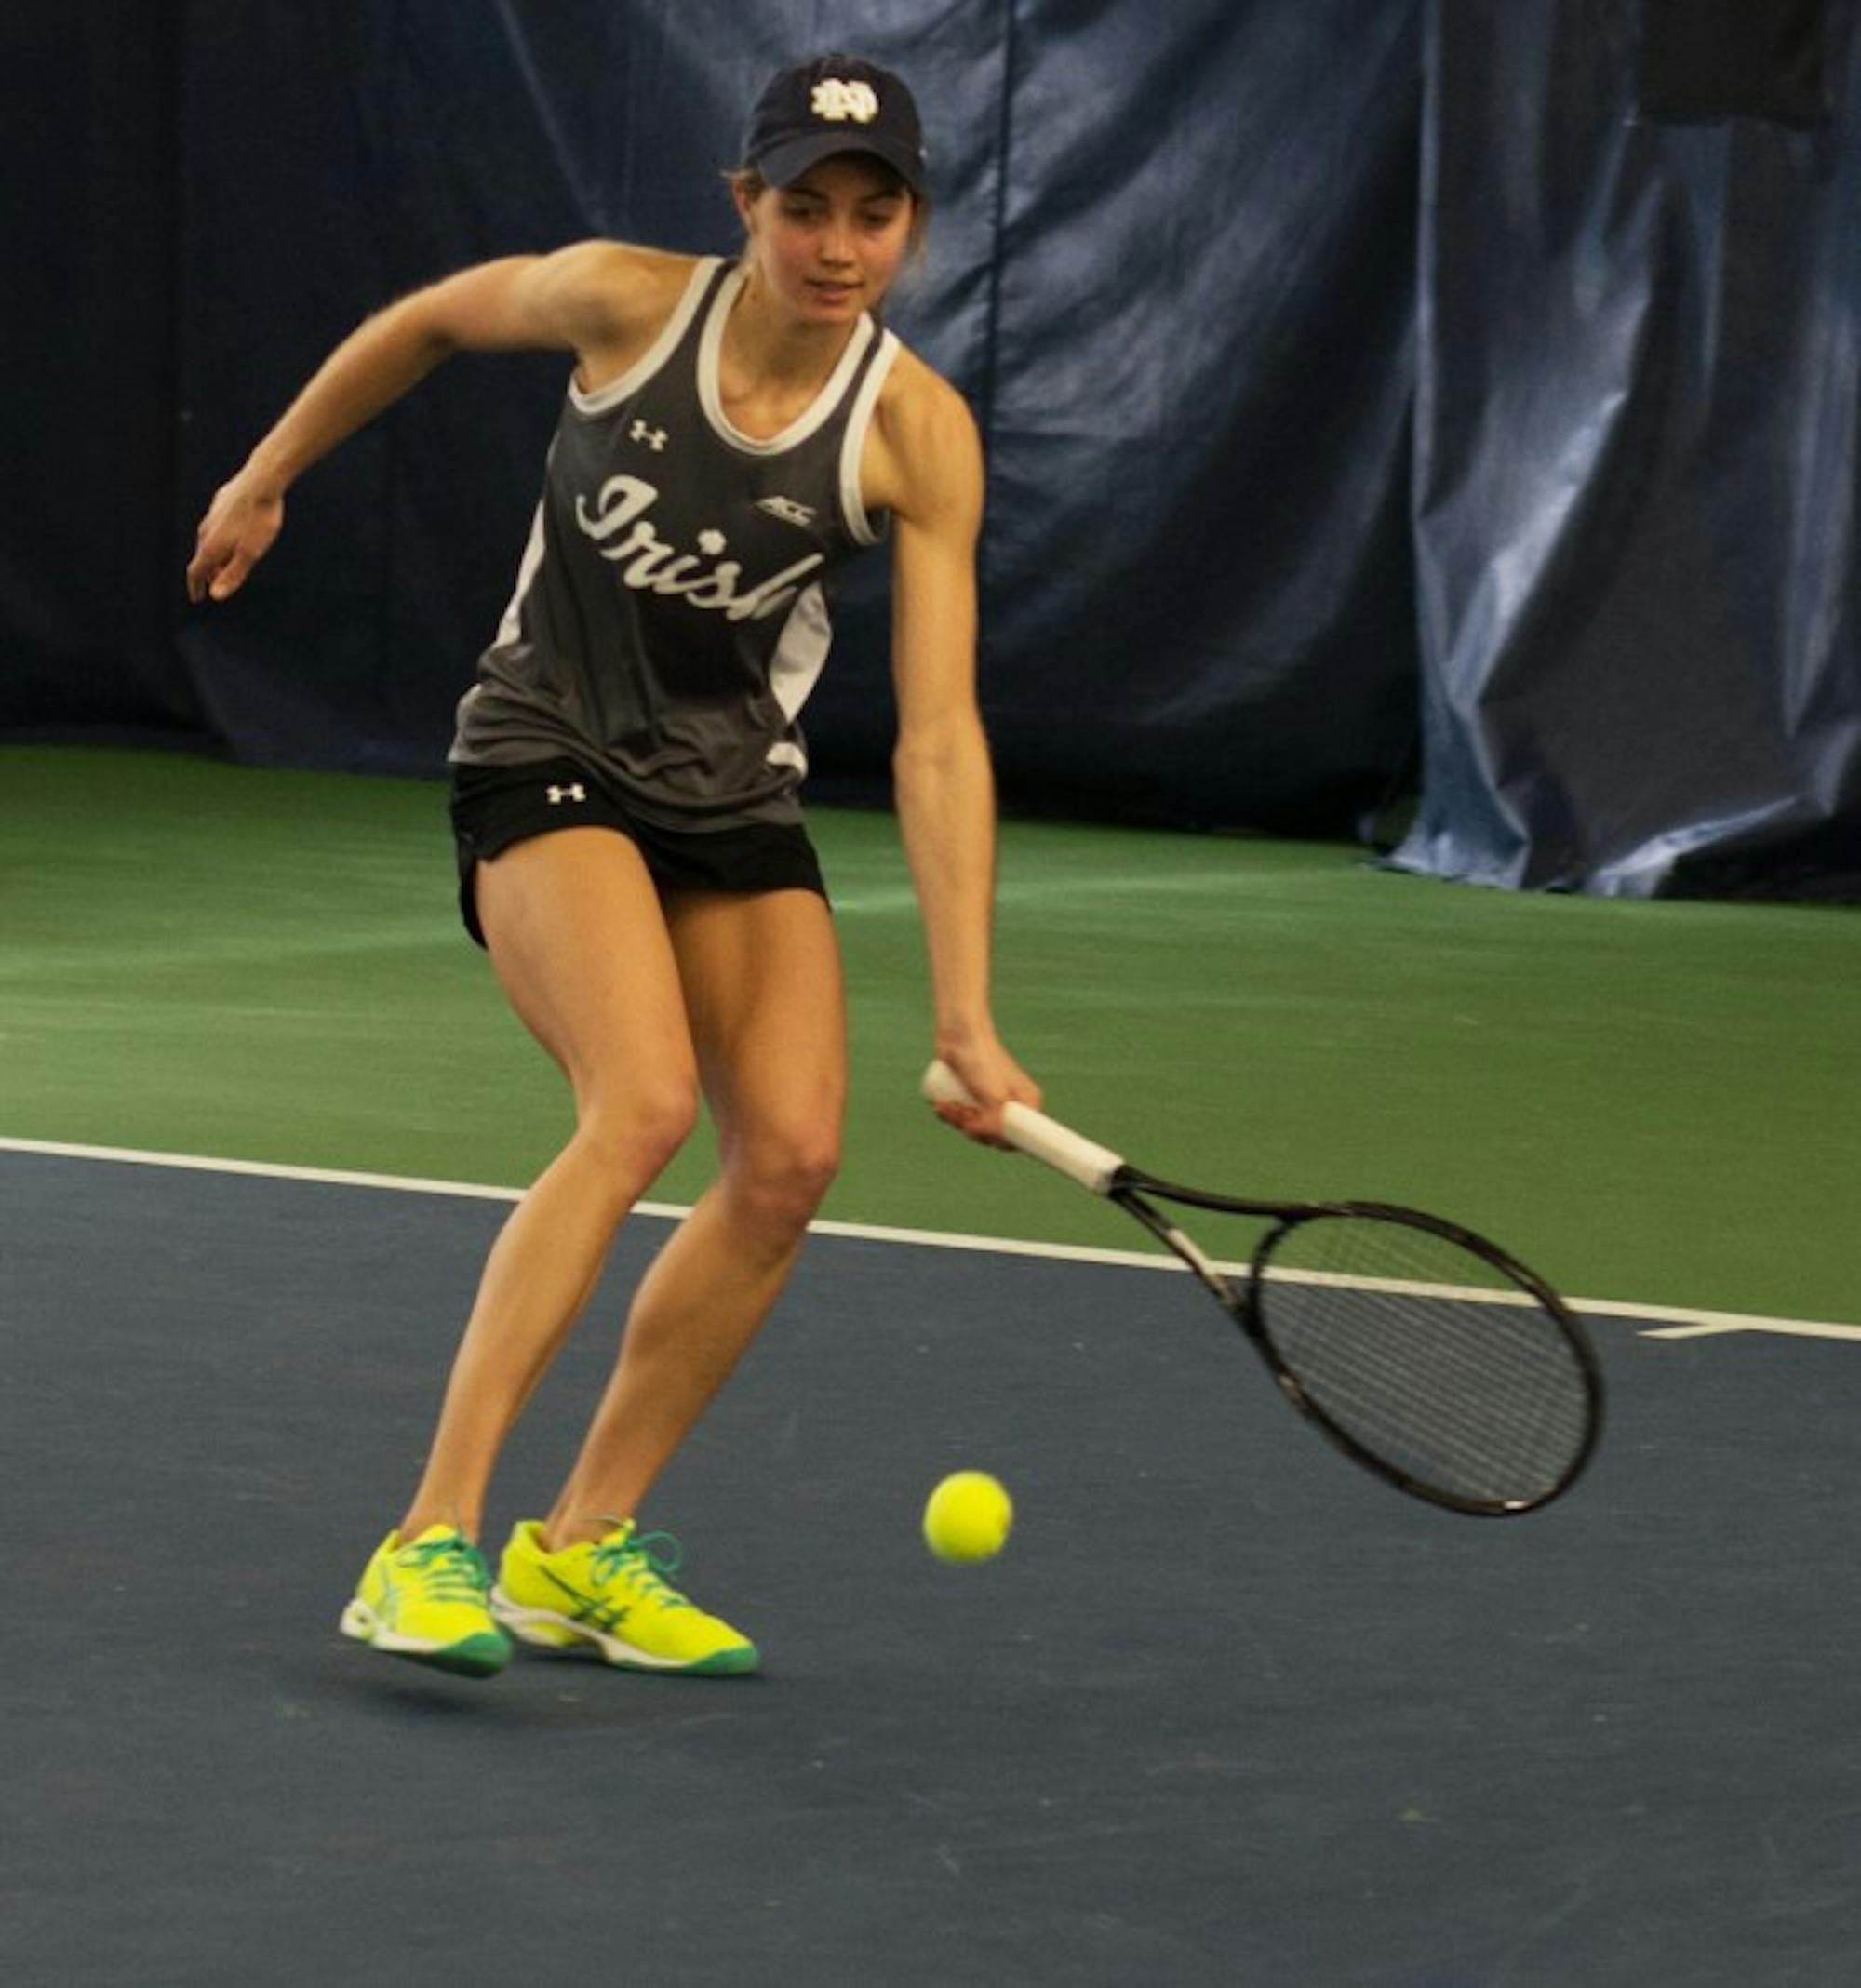 Irish junior Mary Closs reaches to return a shot during Notre Dame’s 6-1 win over Indiana. Closs won her singles match, 6-3, 6-1.